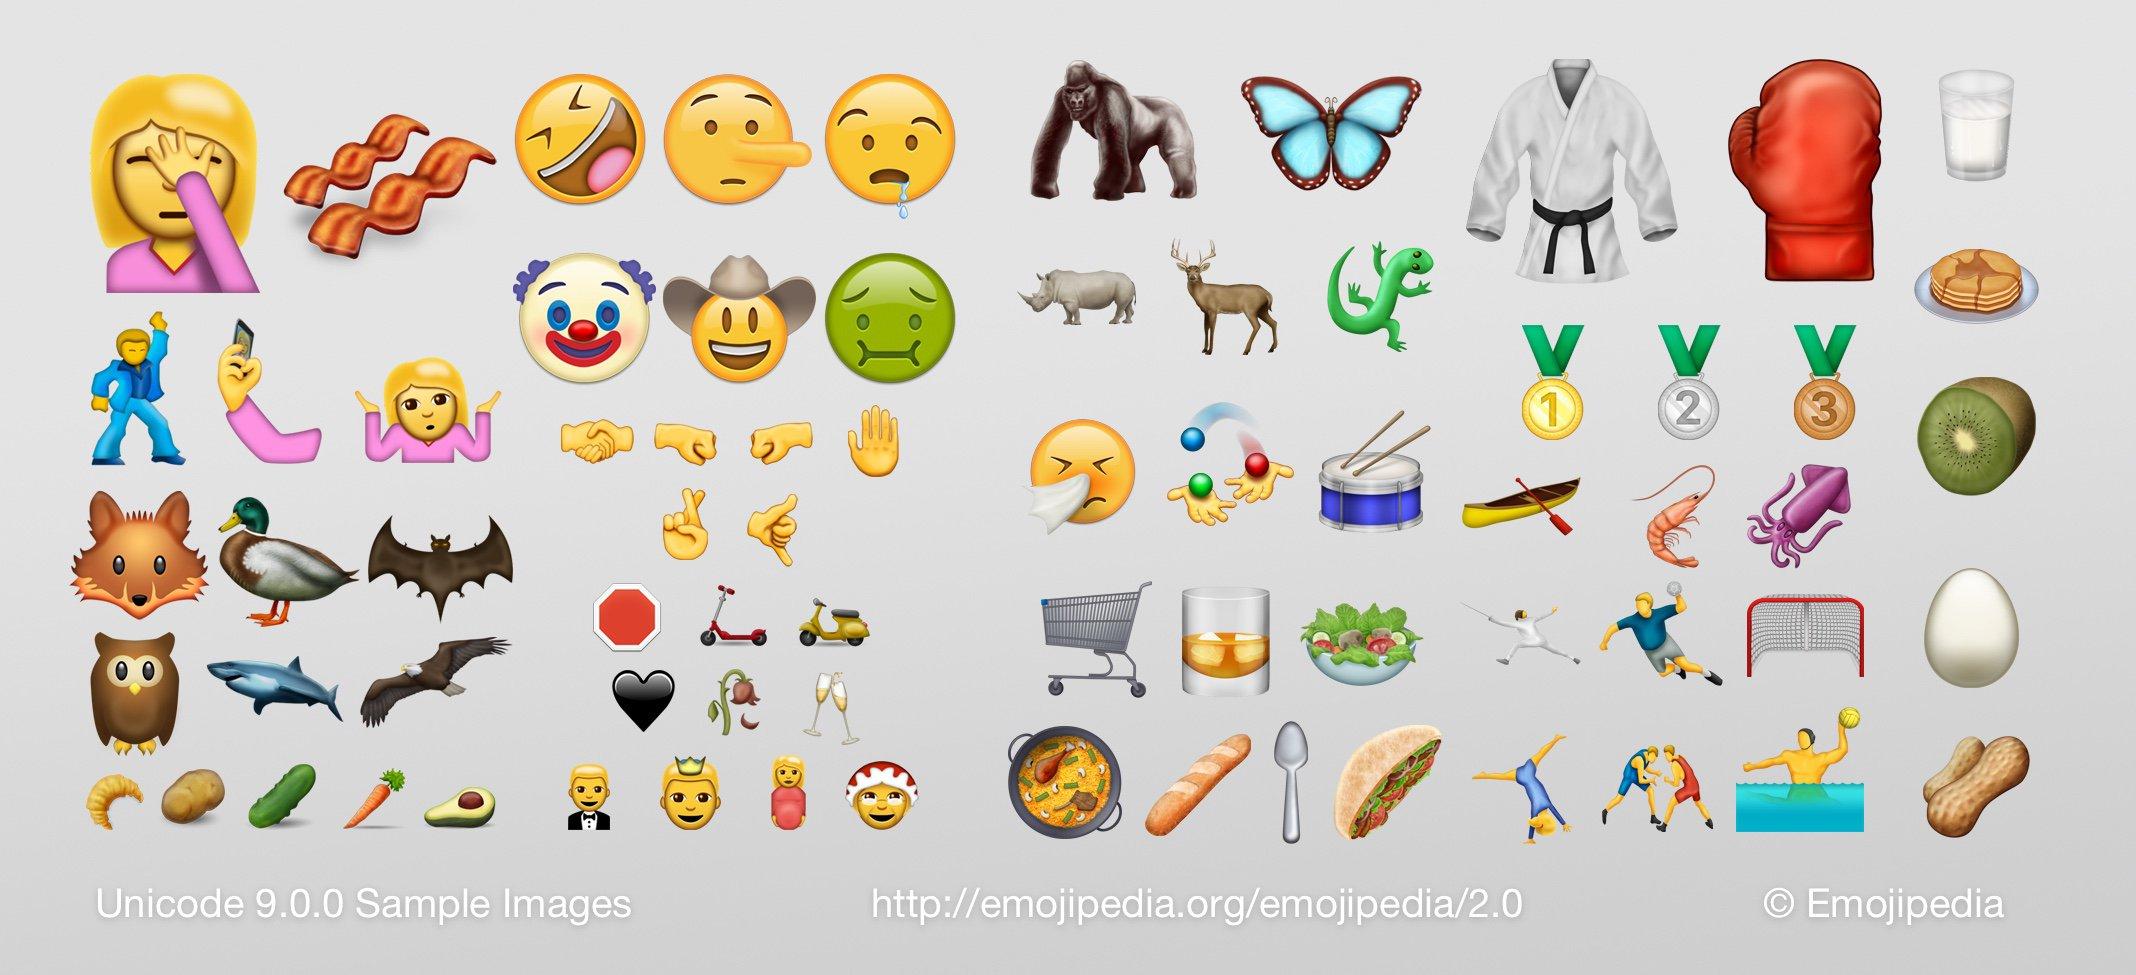 These are the 72 new emoji coming in Unicode 9